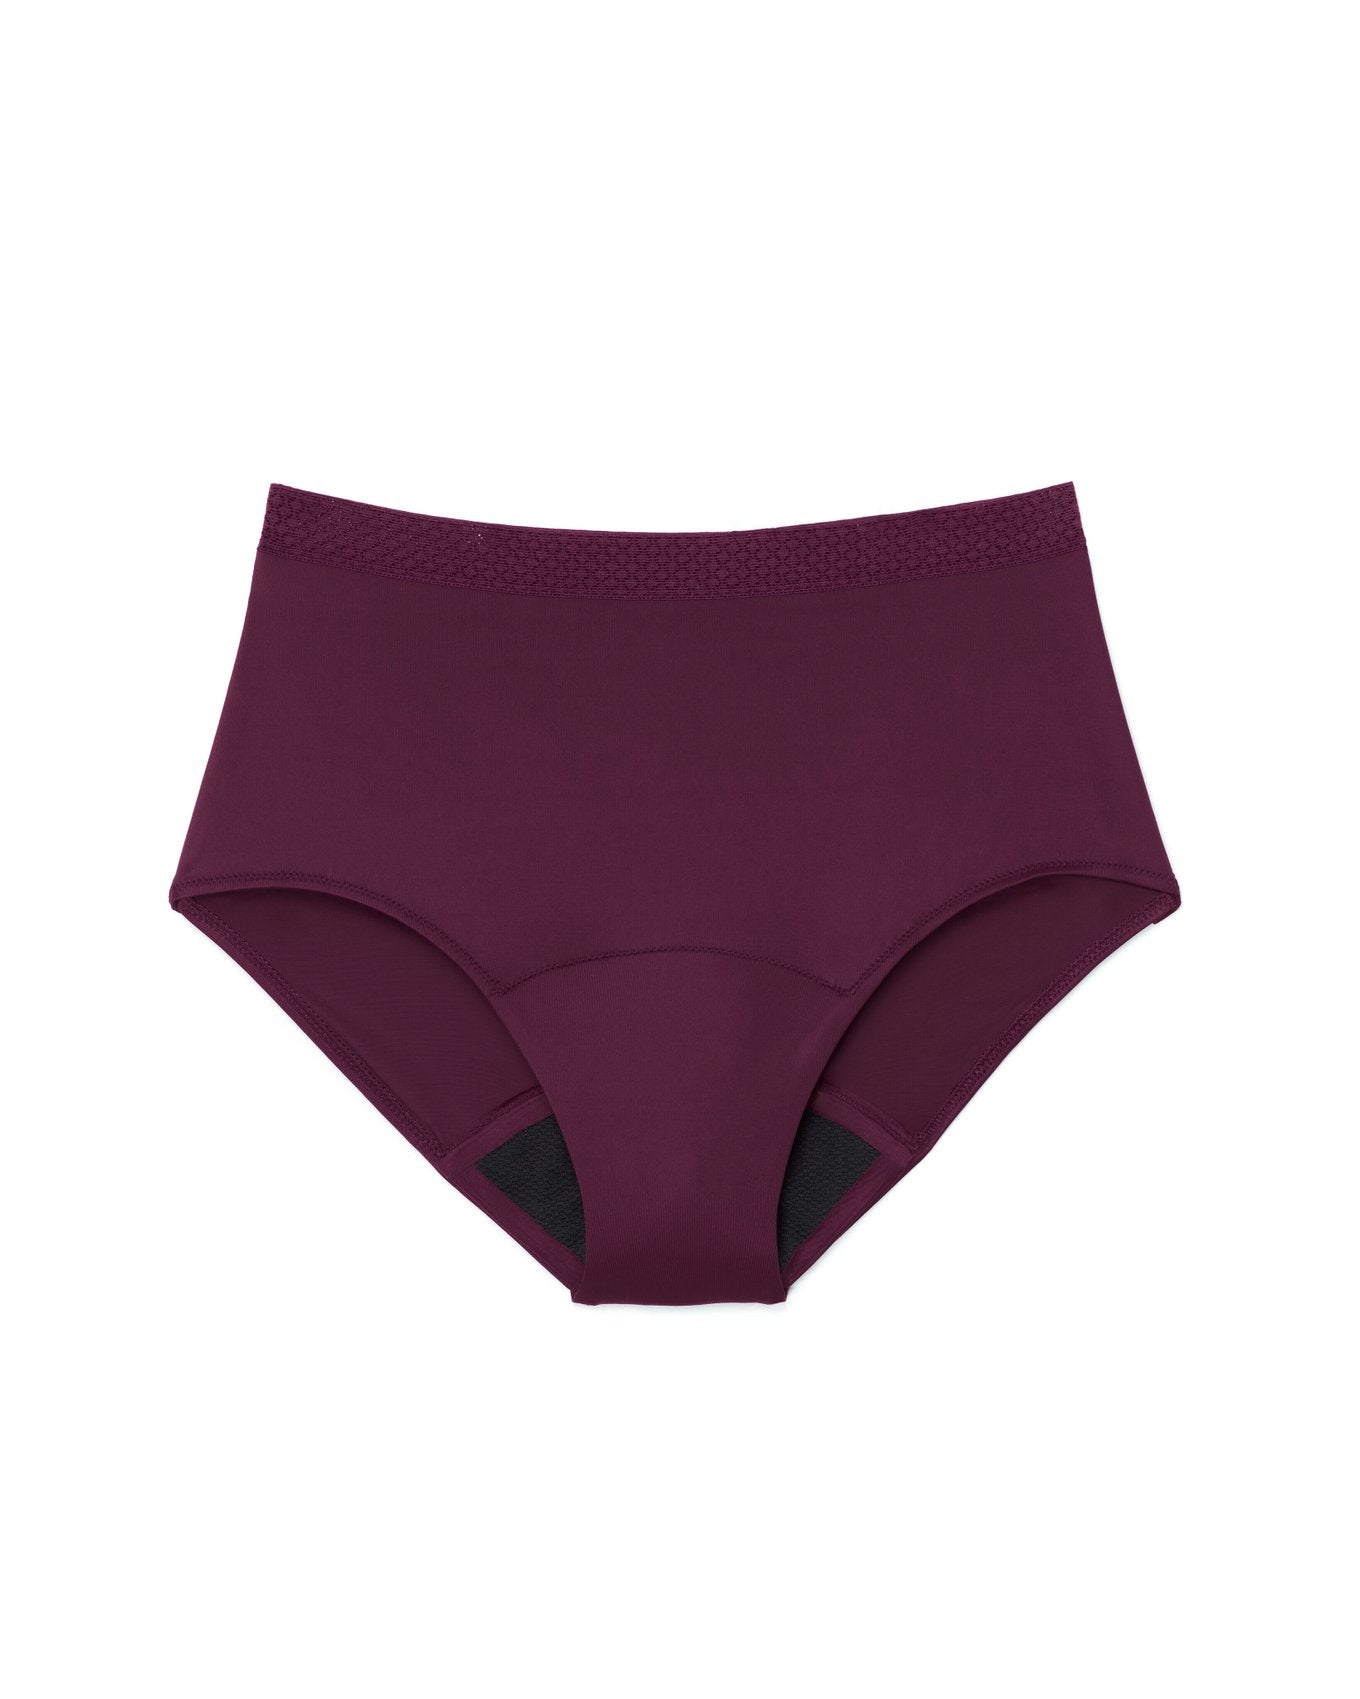 Joyja Jess period-proof panty in color Potent Purple and shape high waisted